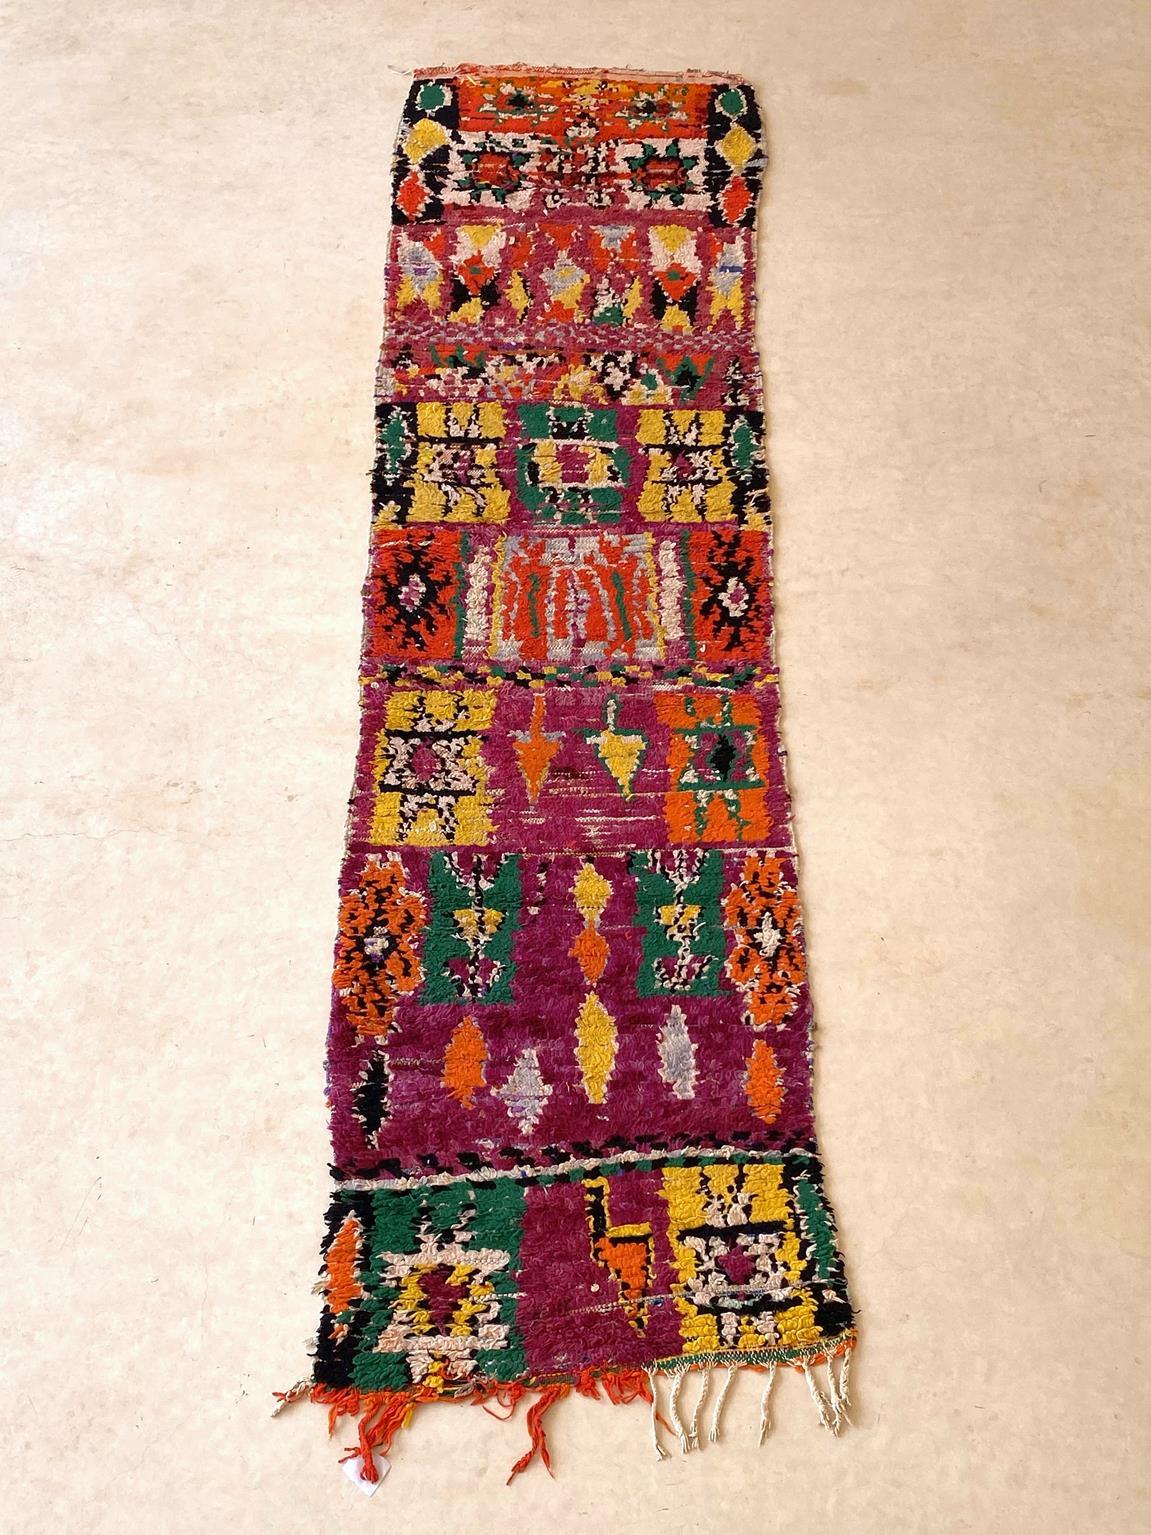 This lovely vintage Boujad runner rug just makes me happy! It shows such joyful and fresh colors and mutliple traditional designs like the usual diamonds and crosses and stars but quite unstructured, almost abstract. Definitely a cool runner rug to